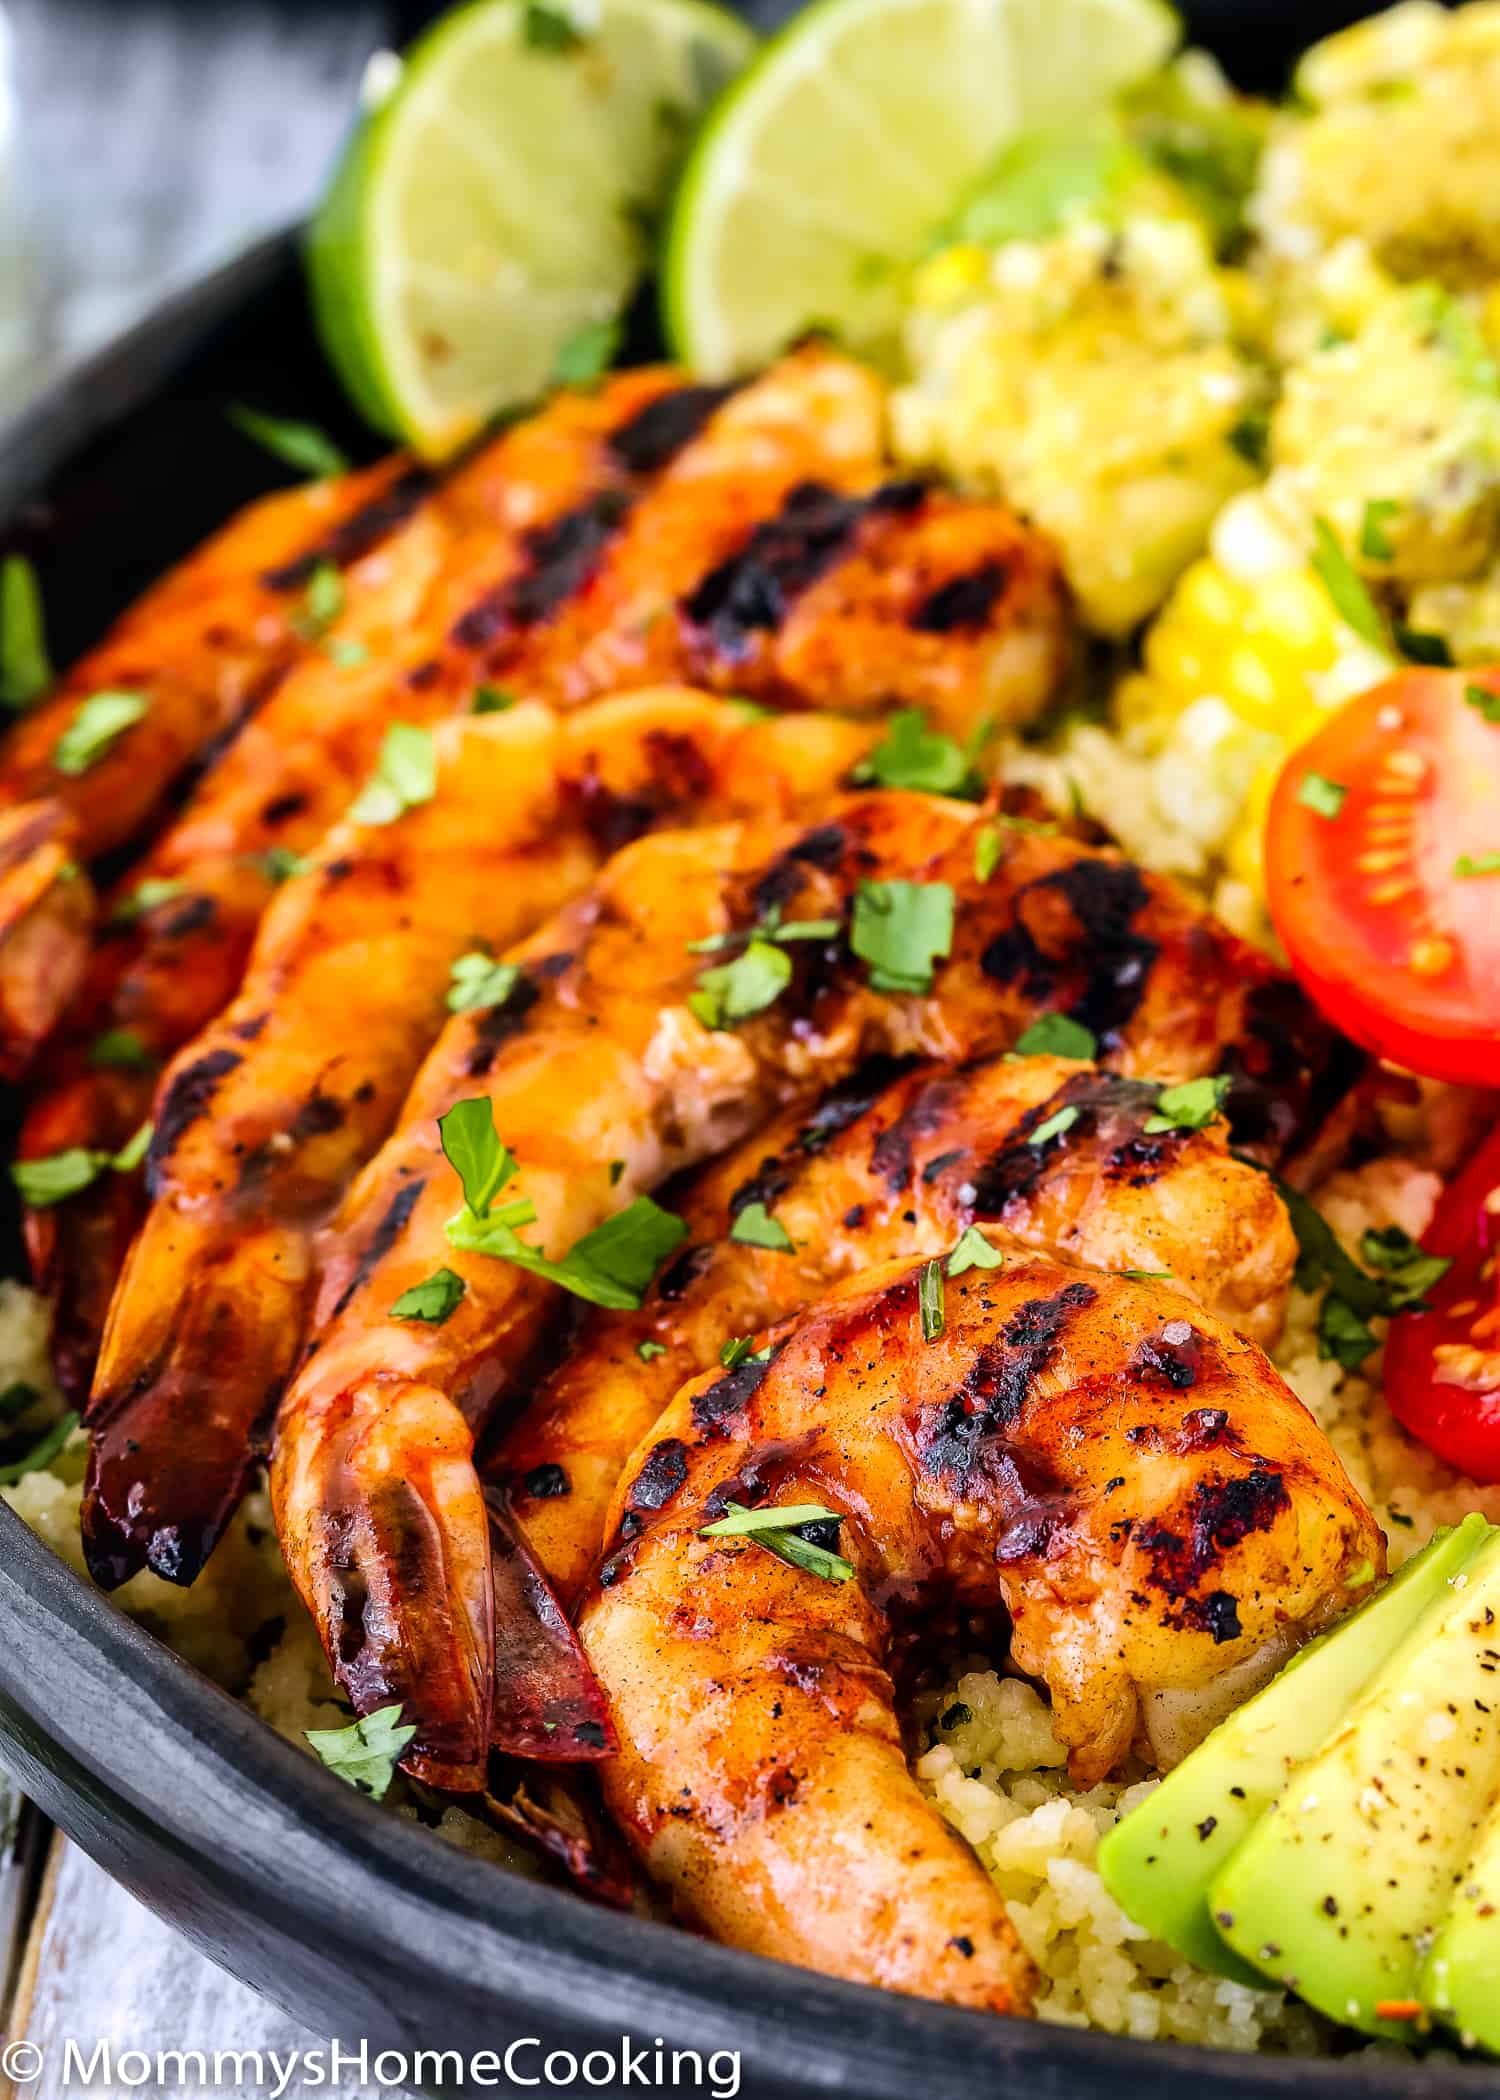 This Grilled Barbecue Shrimp and Corn Avocado Salad Bowls recipe is delicious, incredibly tasty and ridiculously easy to make! Perfectly tender and juicy jumbo shrimp glazed with barbecue sauce, couscous, corn avocado salad, tomatoes, make a perfect summer meal, don't you think? https://mommyshomecooking.com